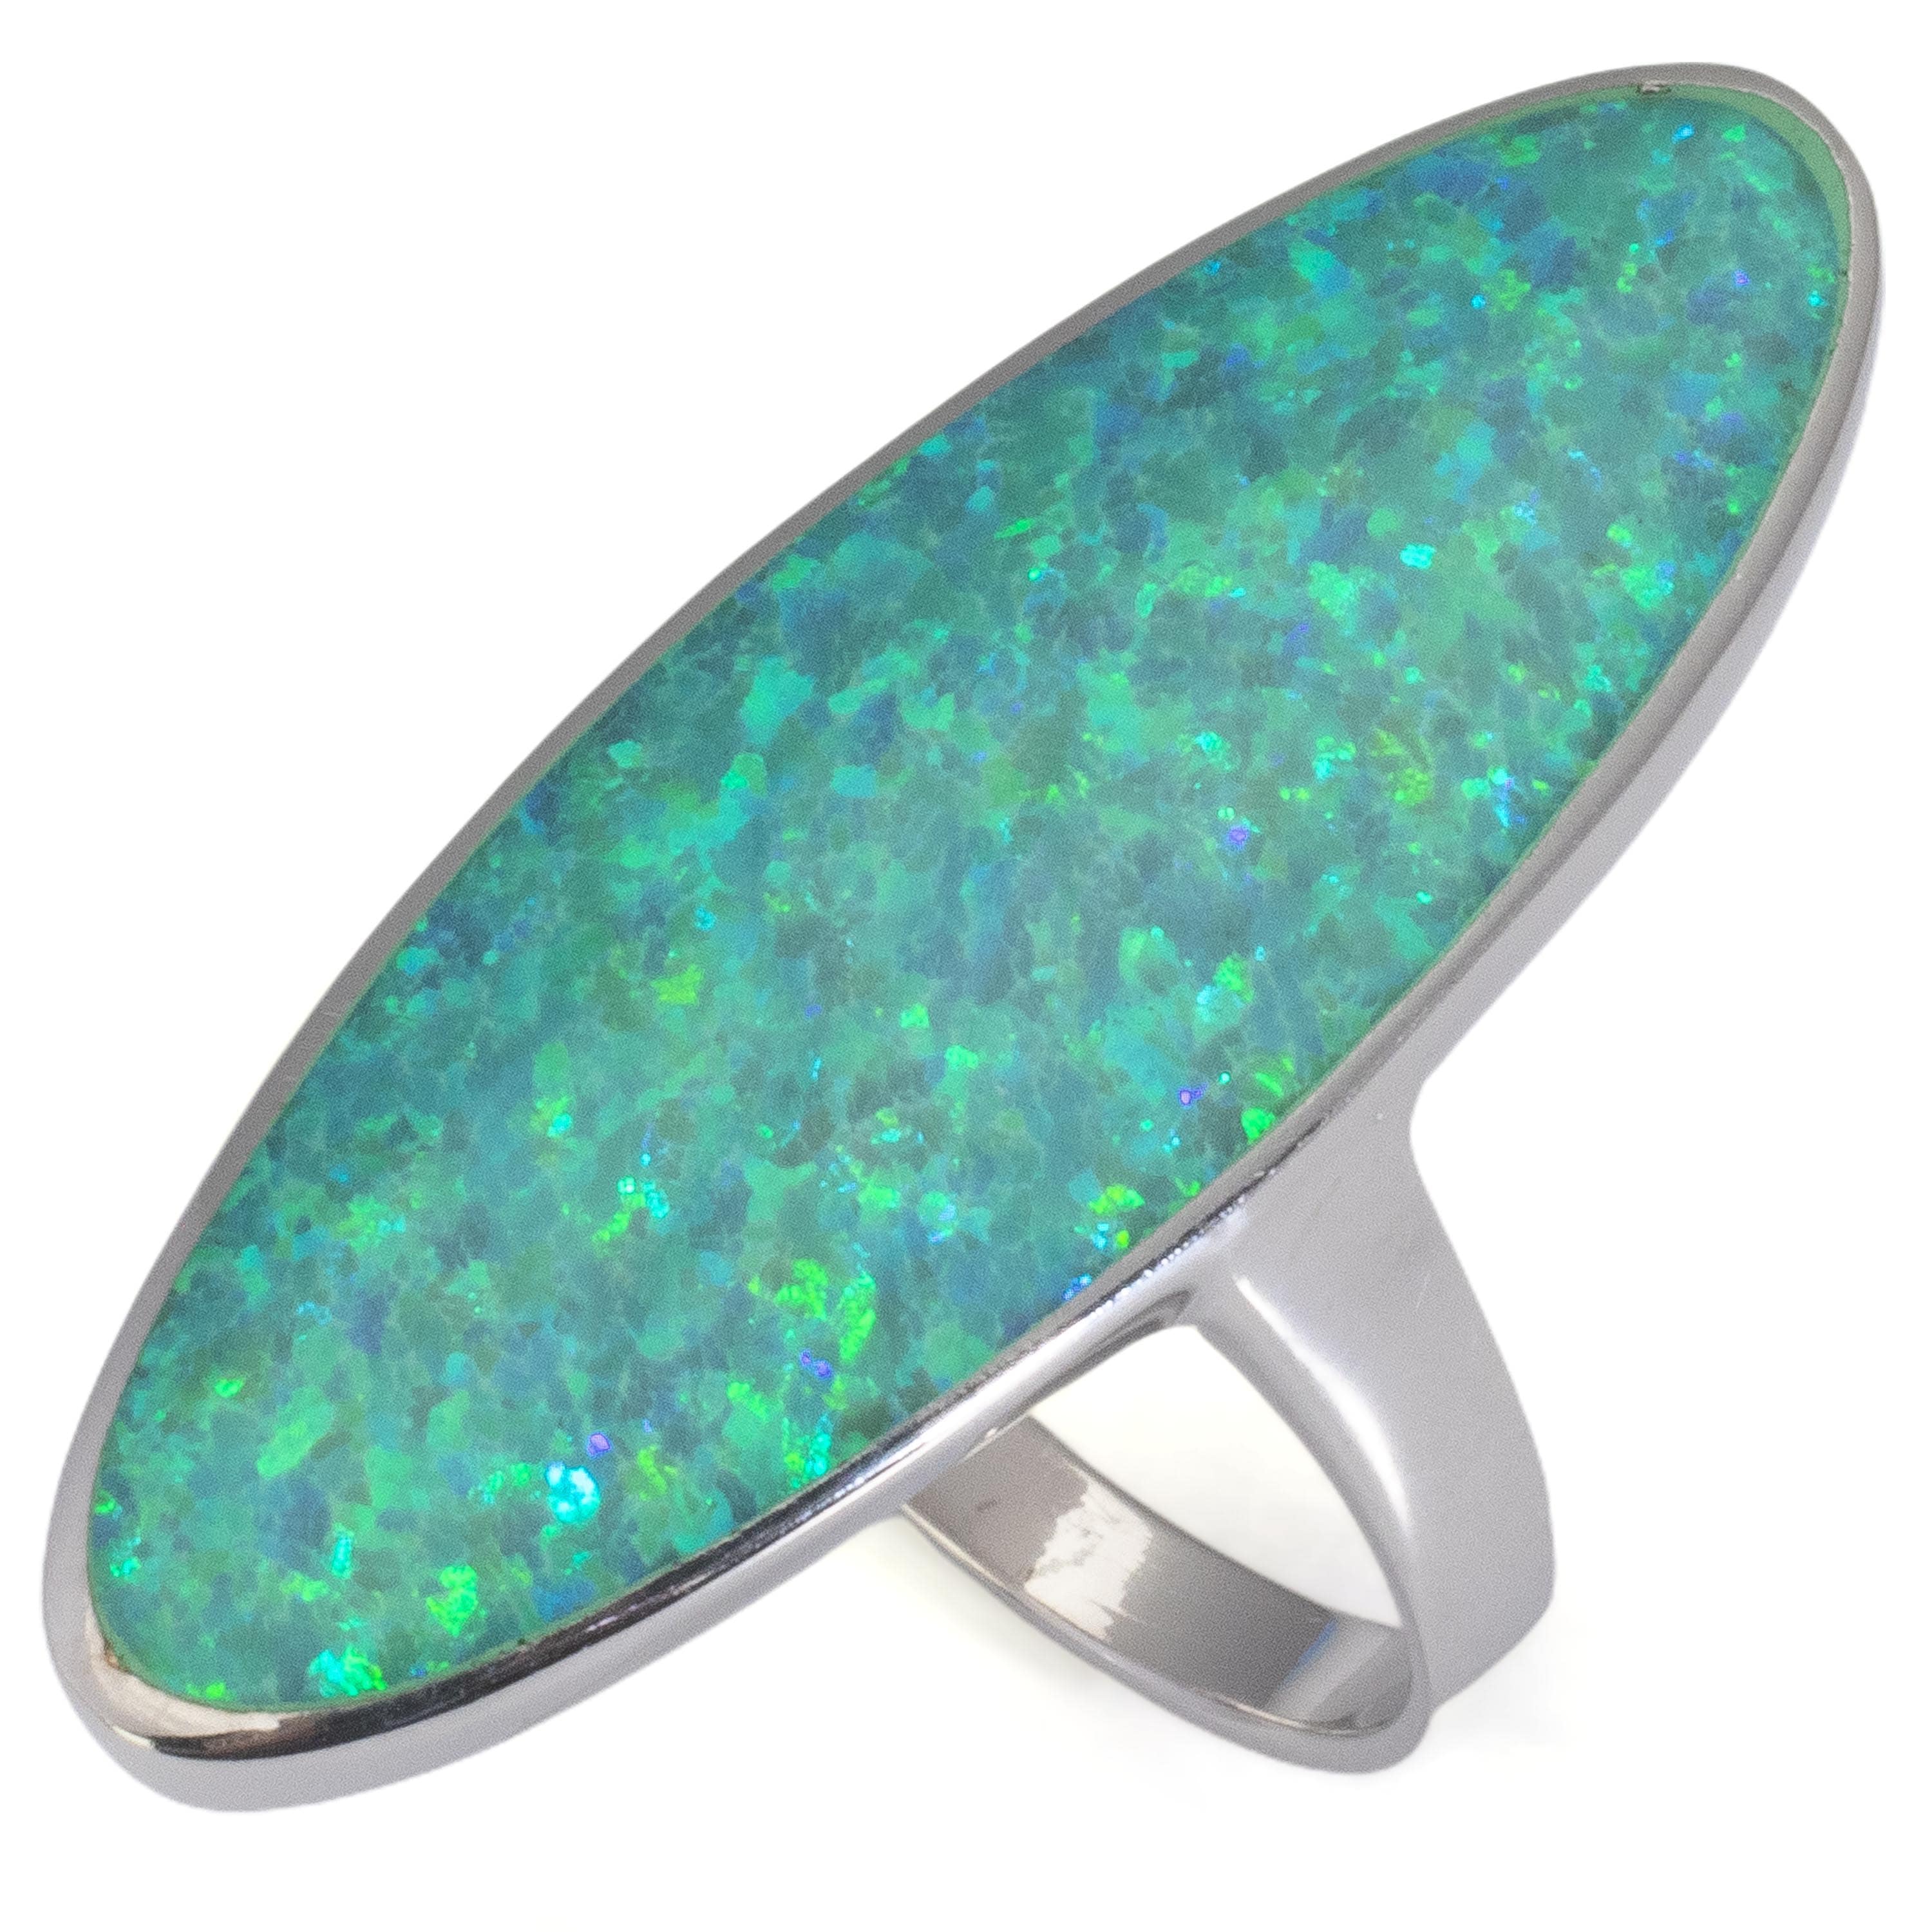 Kalifano Southwest Silver Jewelry 10 Green Opal 925 Sterling Silver Ring Handmade NMR.0056.GO.10